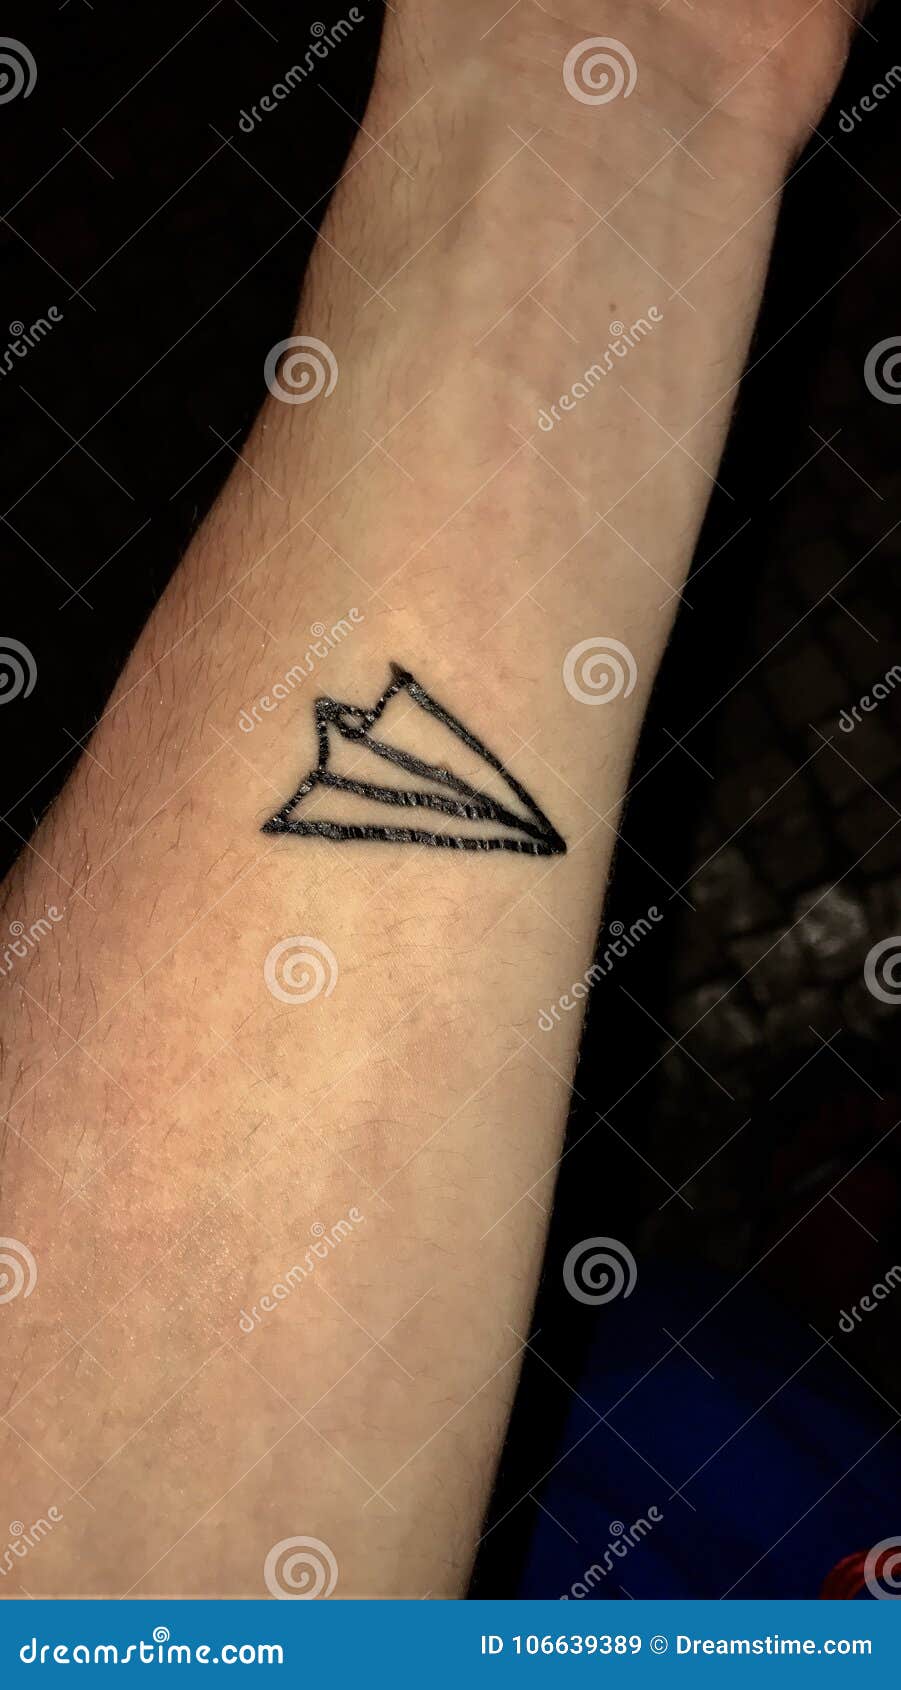 What does a paper plane tattoo mean? - Quora